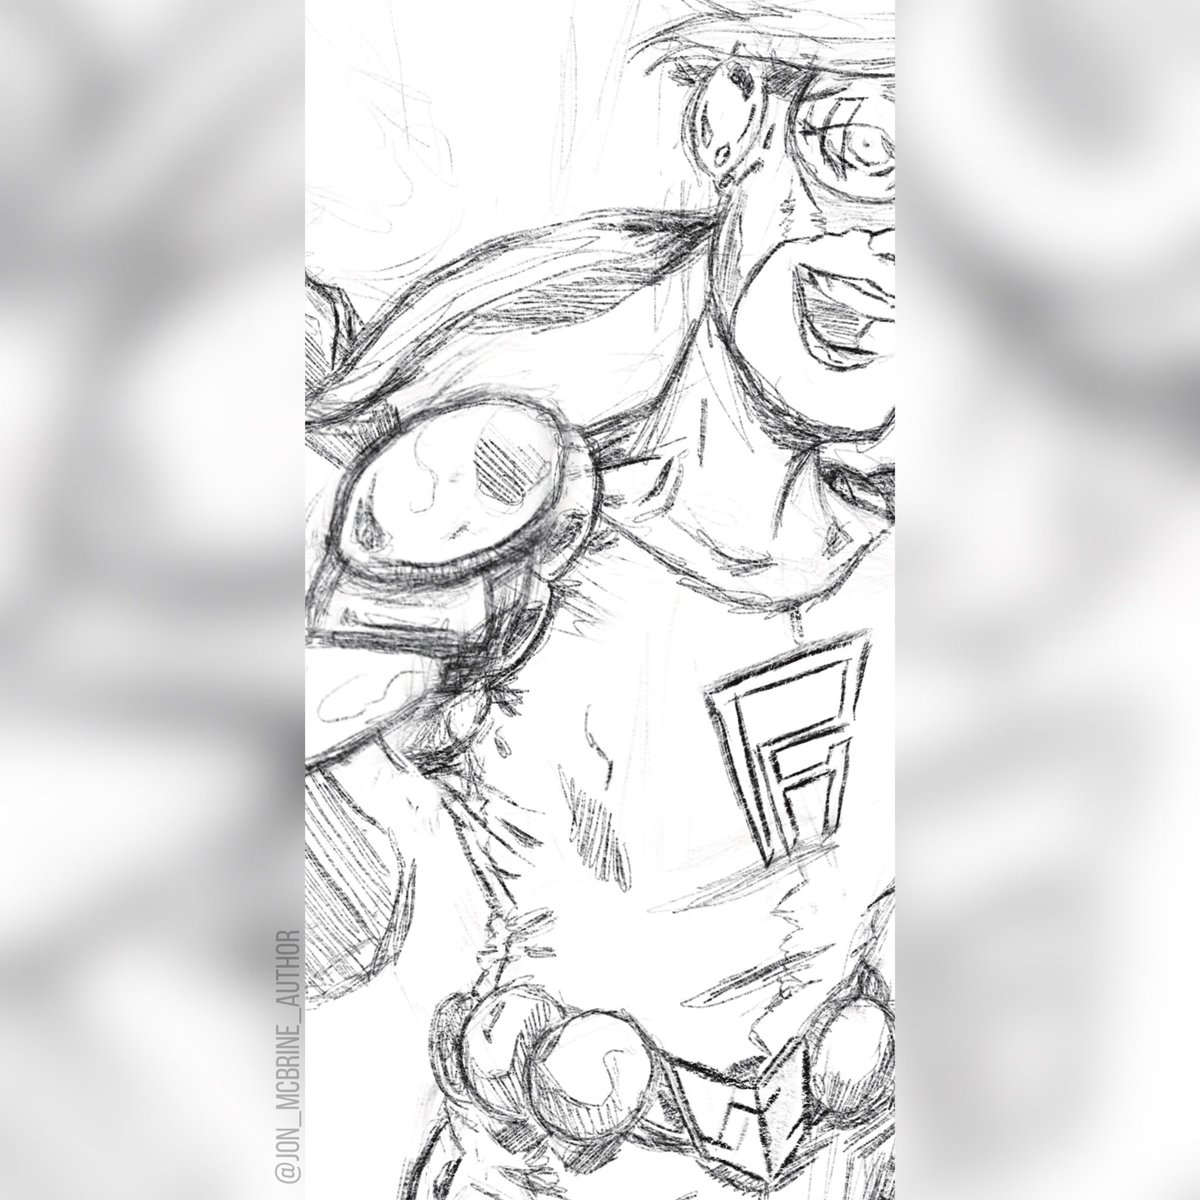 A piece of Powerhouse art from the forthcoming print paperback edition of “Unsecret Identity: Eric Icarus - Book One”
#superhero #power #print #teaser #sidekick #superstrength #tech #yascifi #youngadultbooks #superheroes #superheroparty #monday #art #digitalart #novel #author